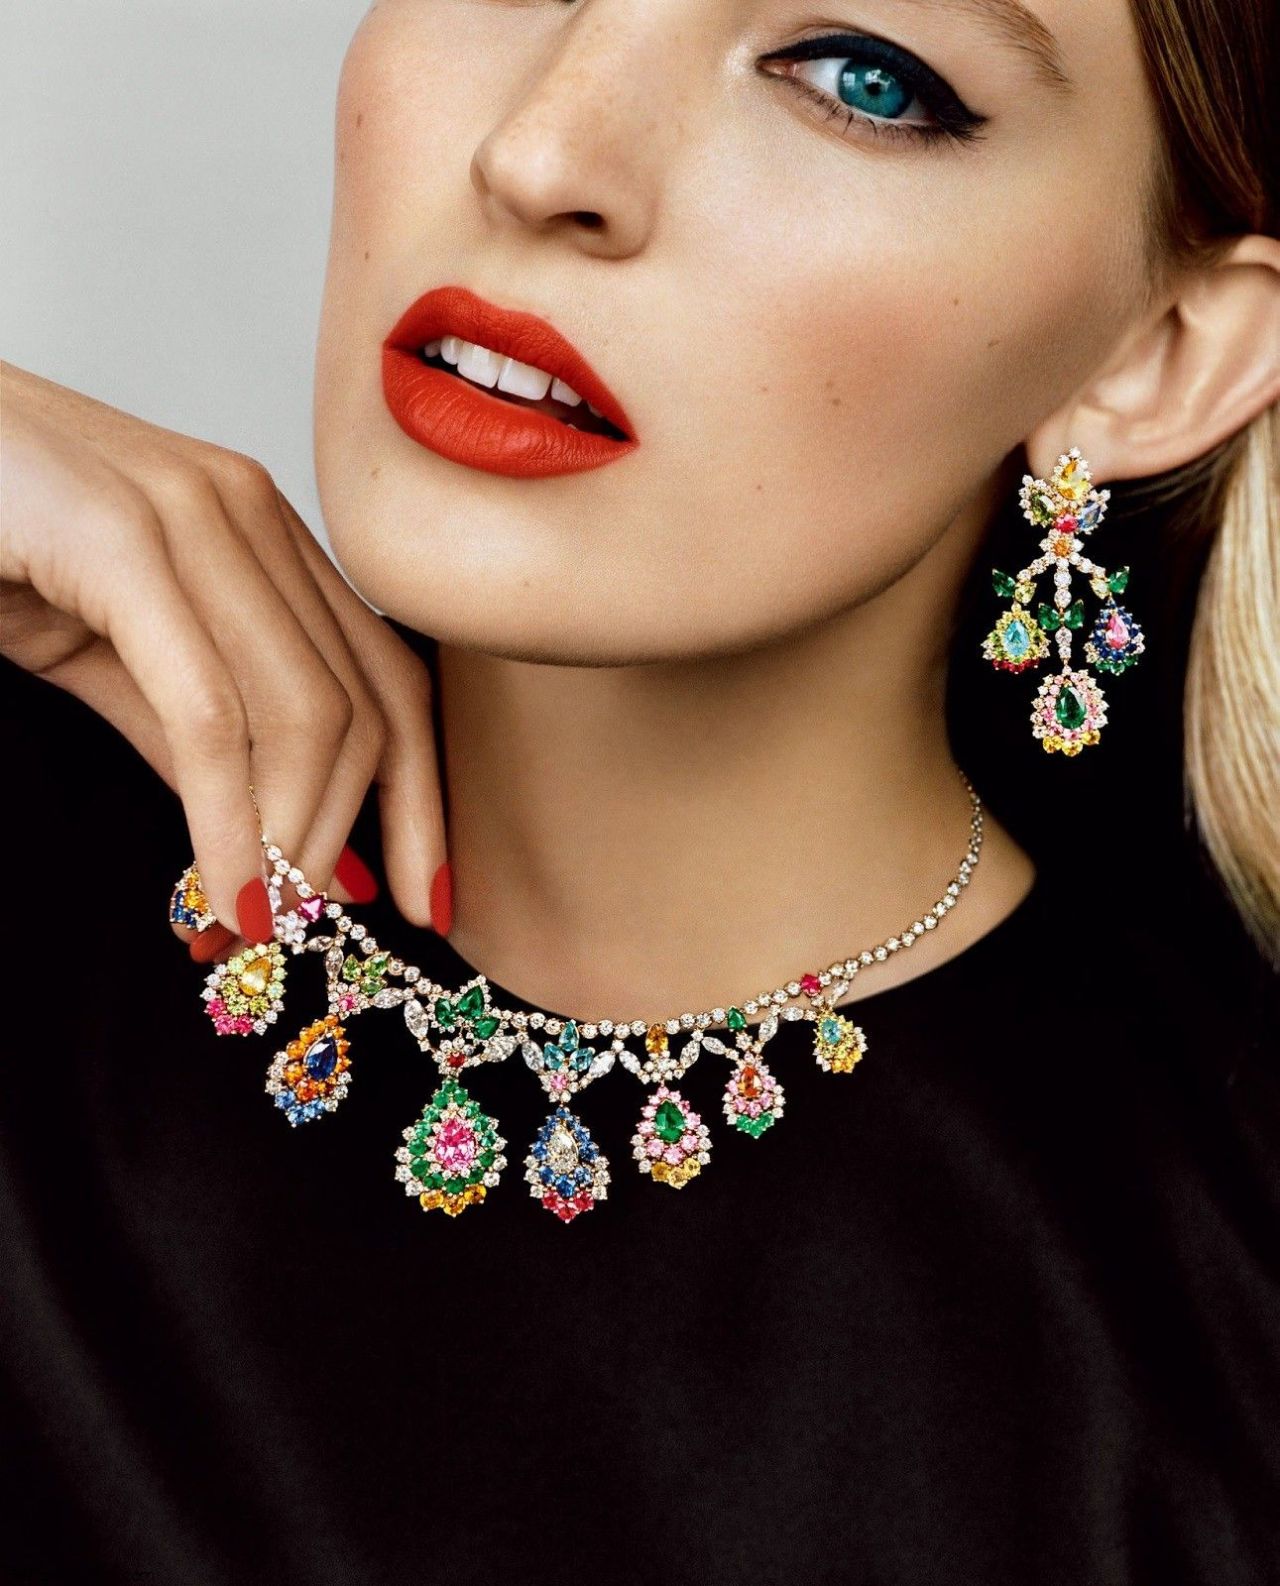 lovejewelry:

Dior Jewelry for Vogue Japan 2013